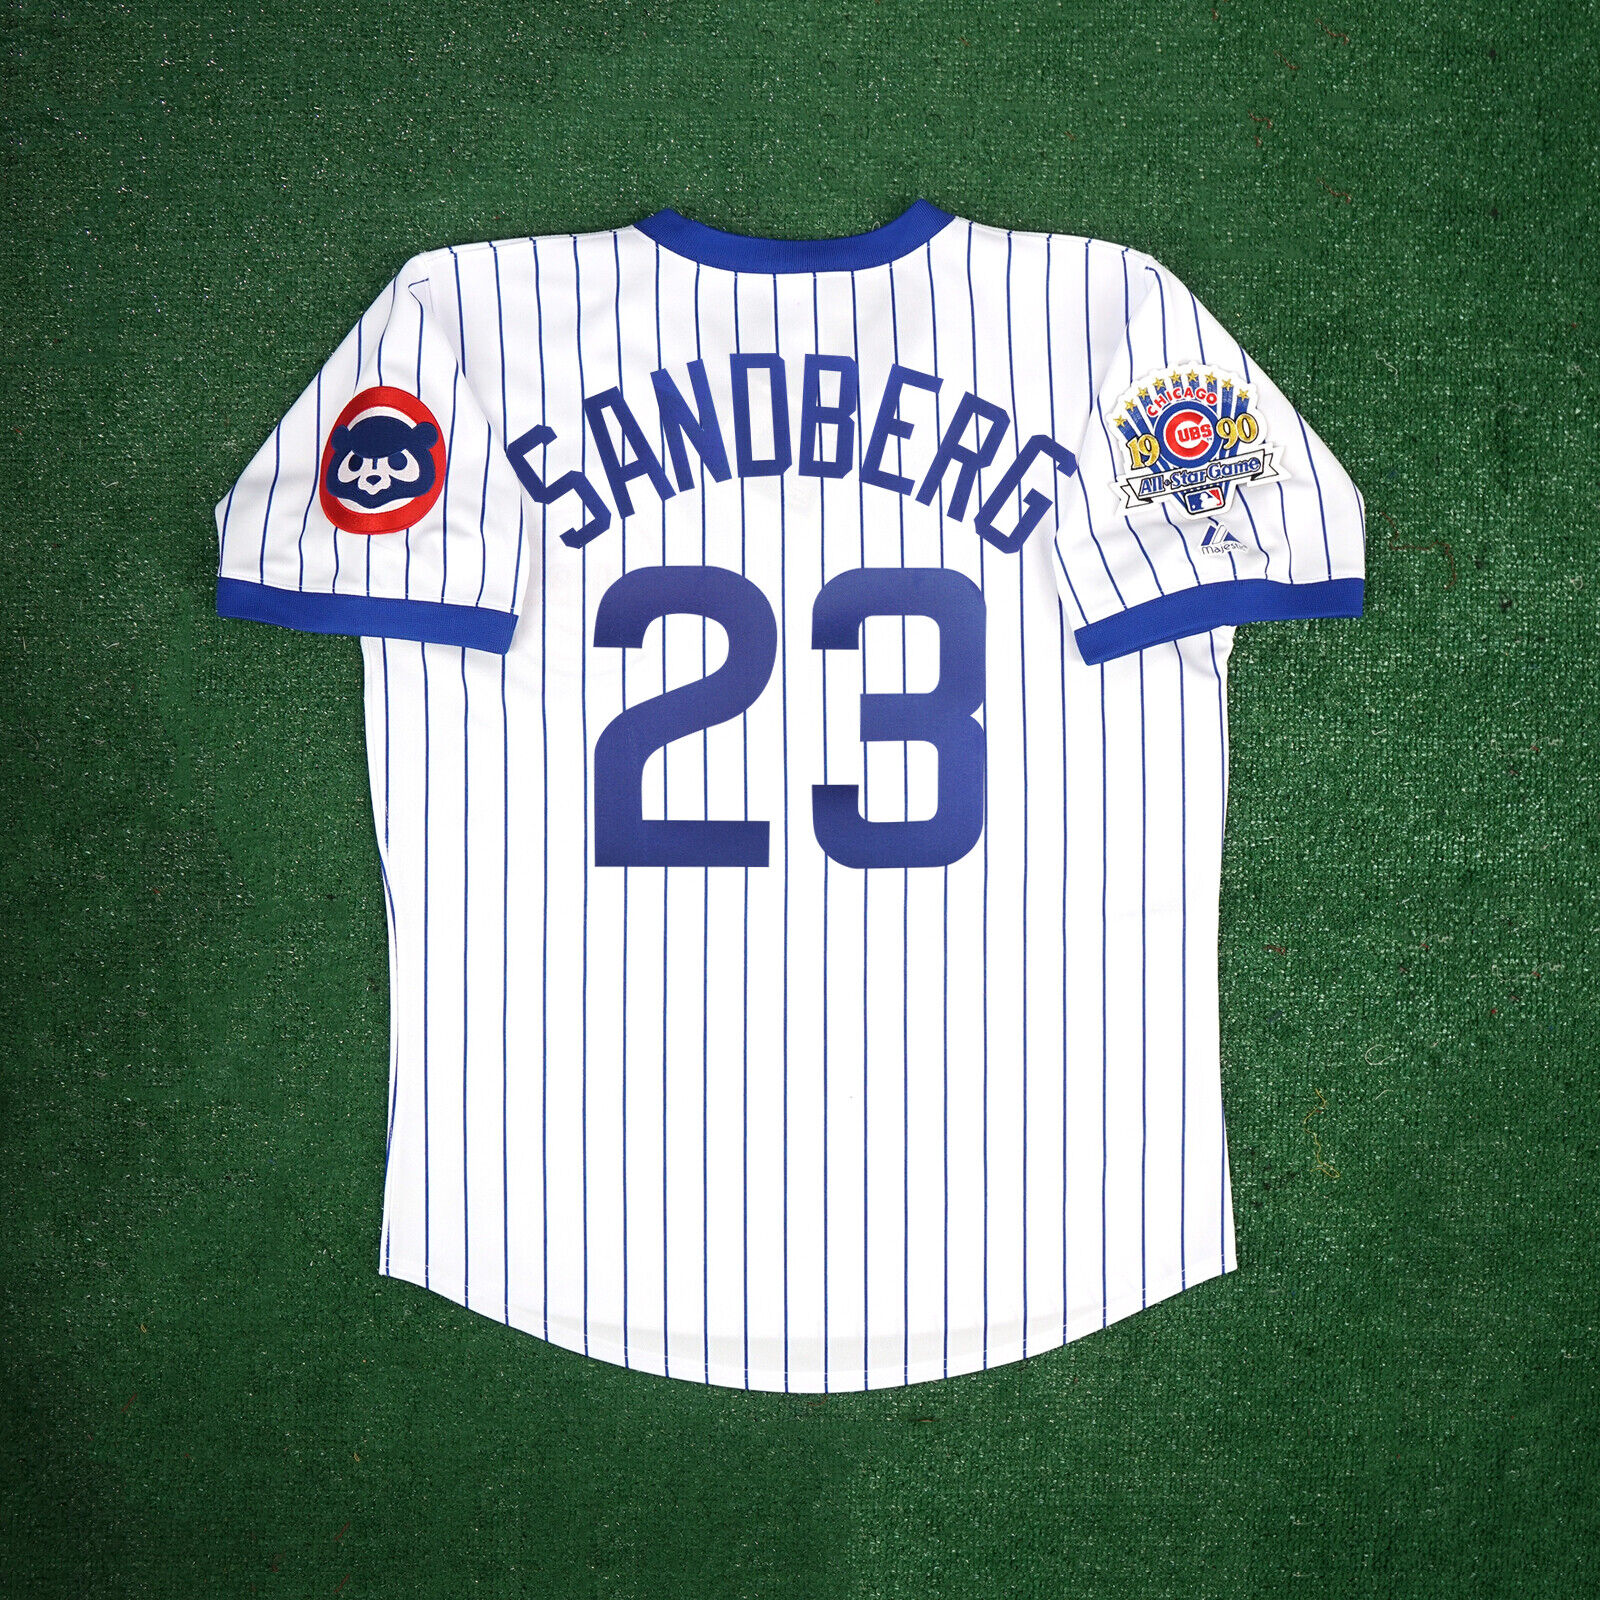 Ryne Sandberg 1990 Chicago Cubs Men\'s Home Cooperstown Jersey w/ All Star Patch